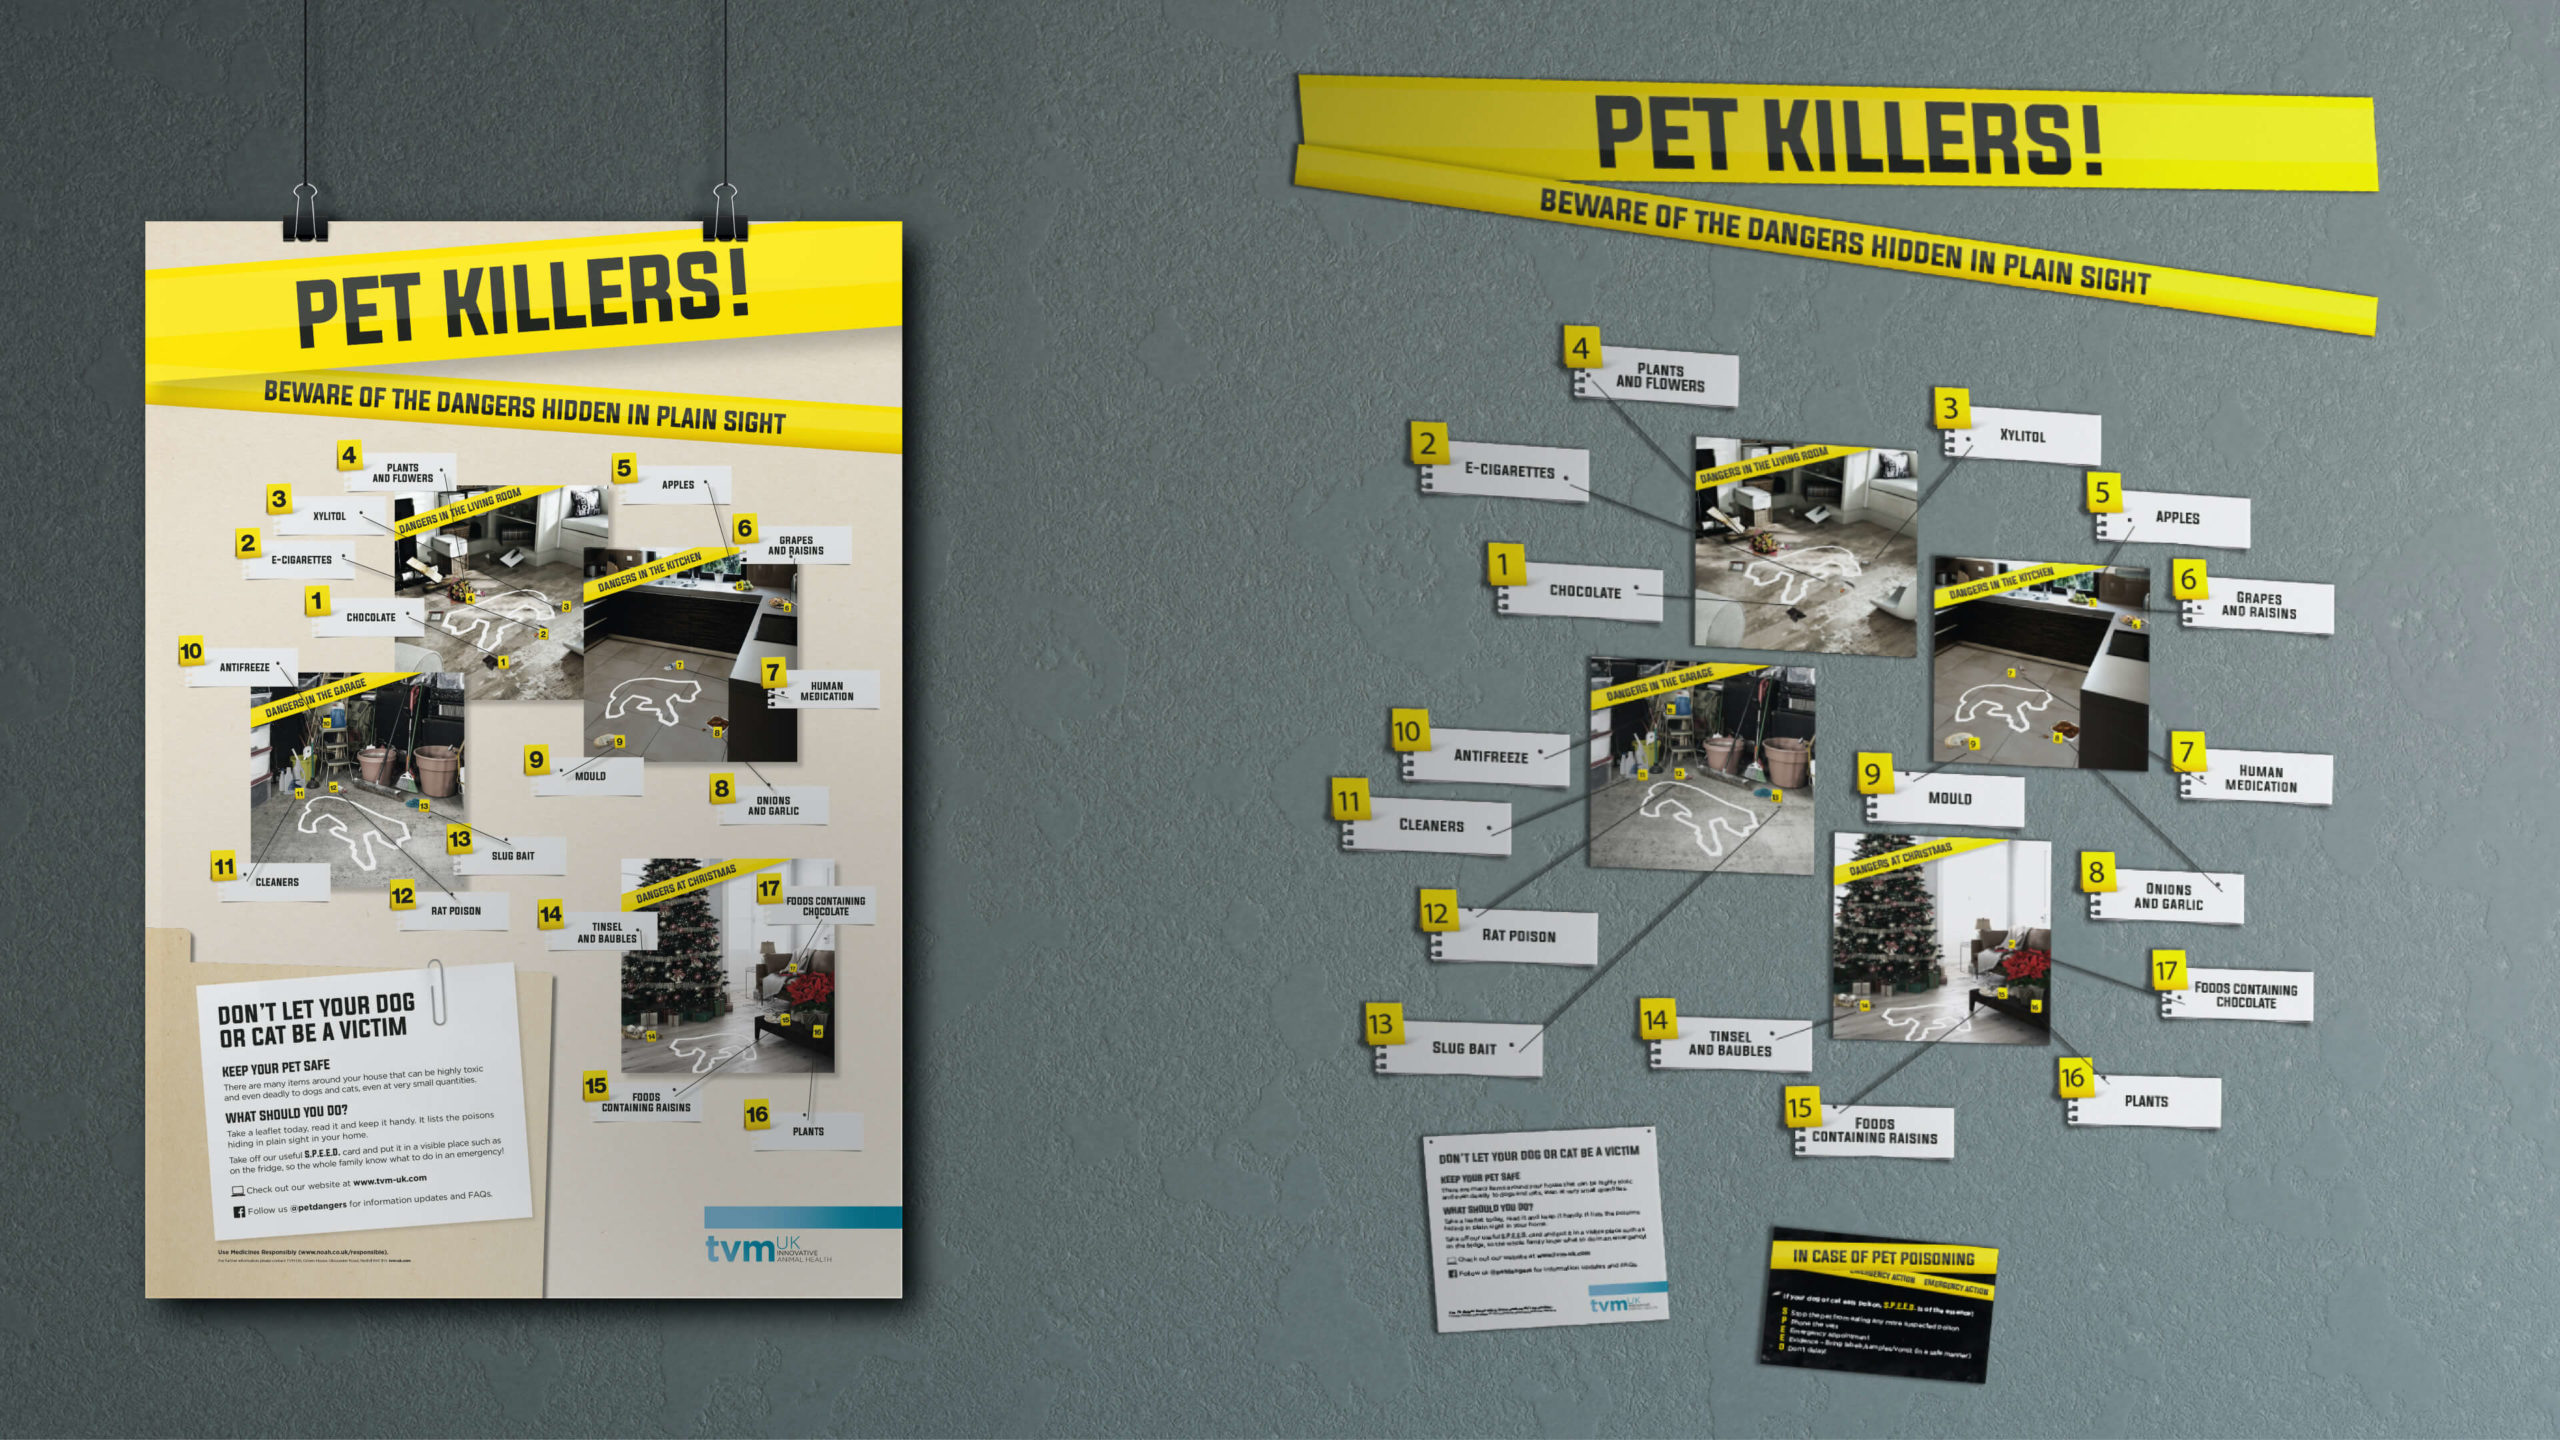 TVM Anti-tox Pet Killers Poster and Wall Display